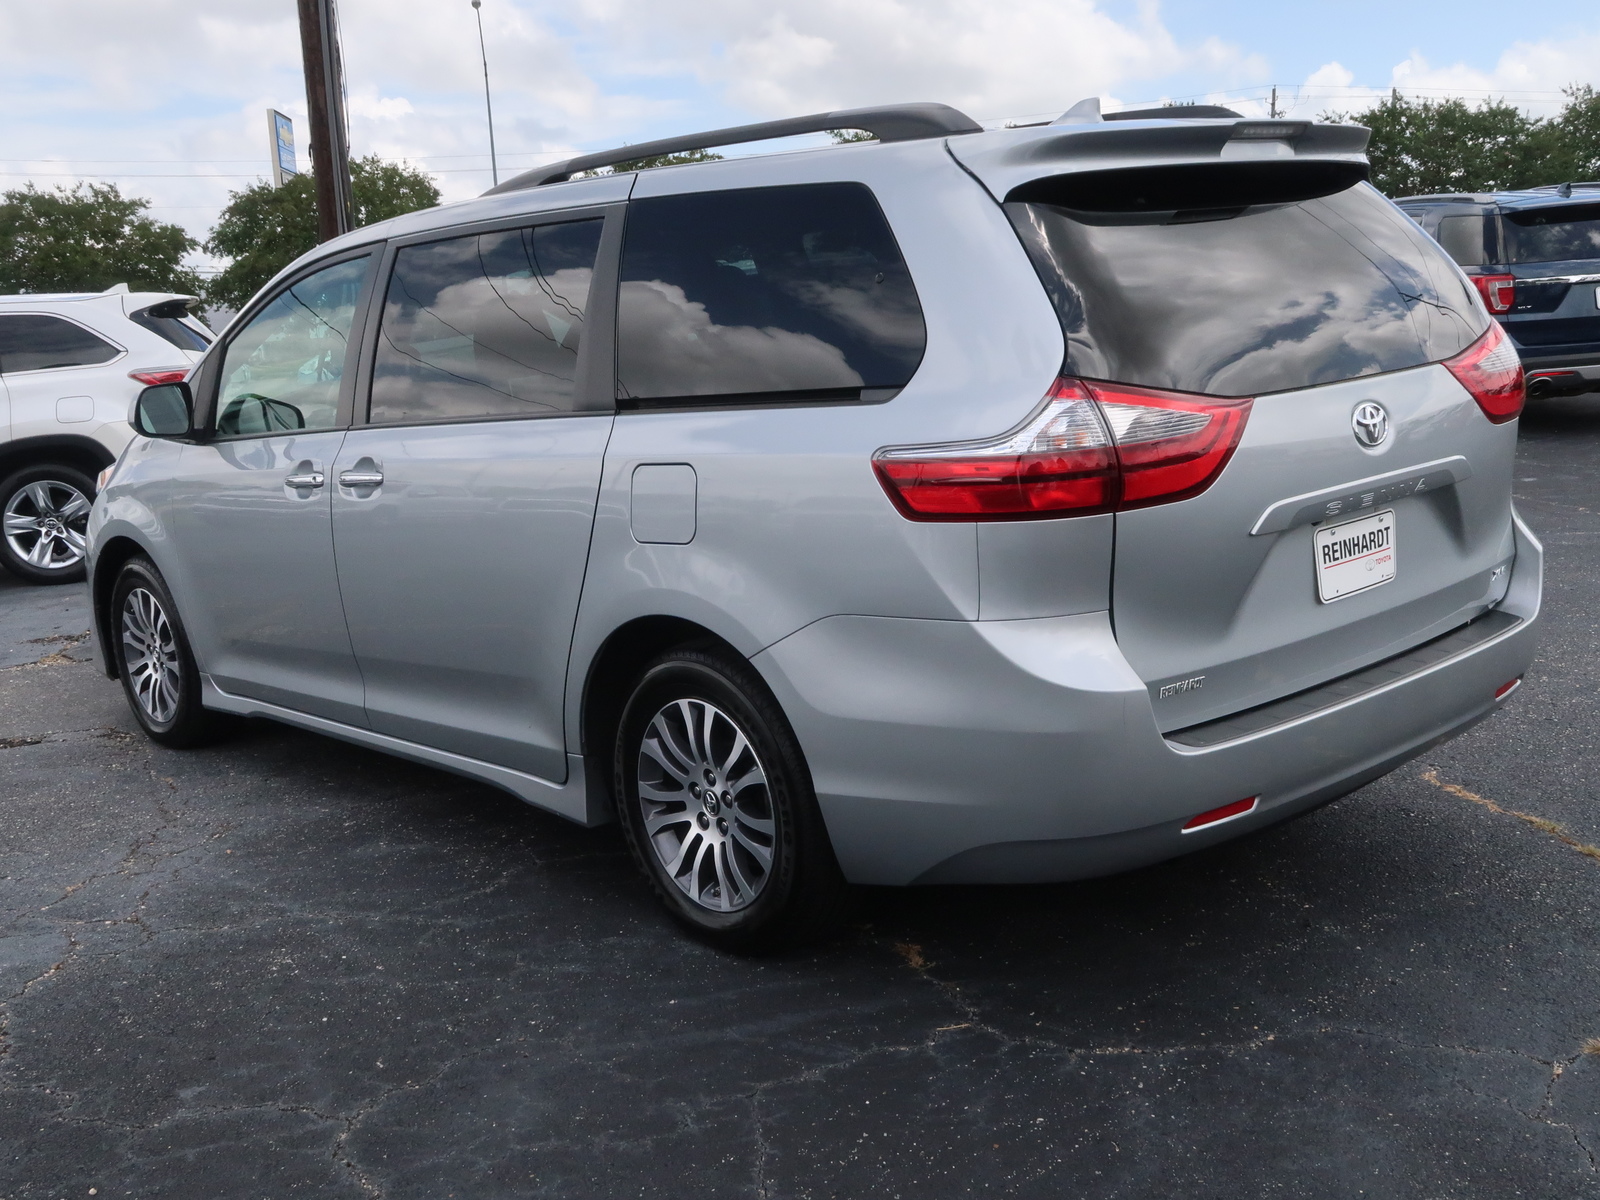 PreOwned 2020 Toyota Sienna XLE FWD 8Passenger (Natl) XLE FWD 8